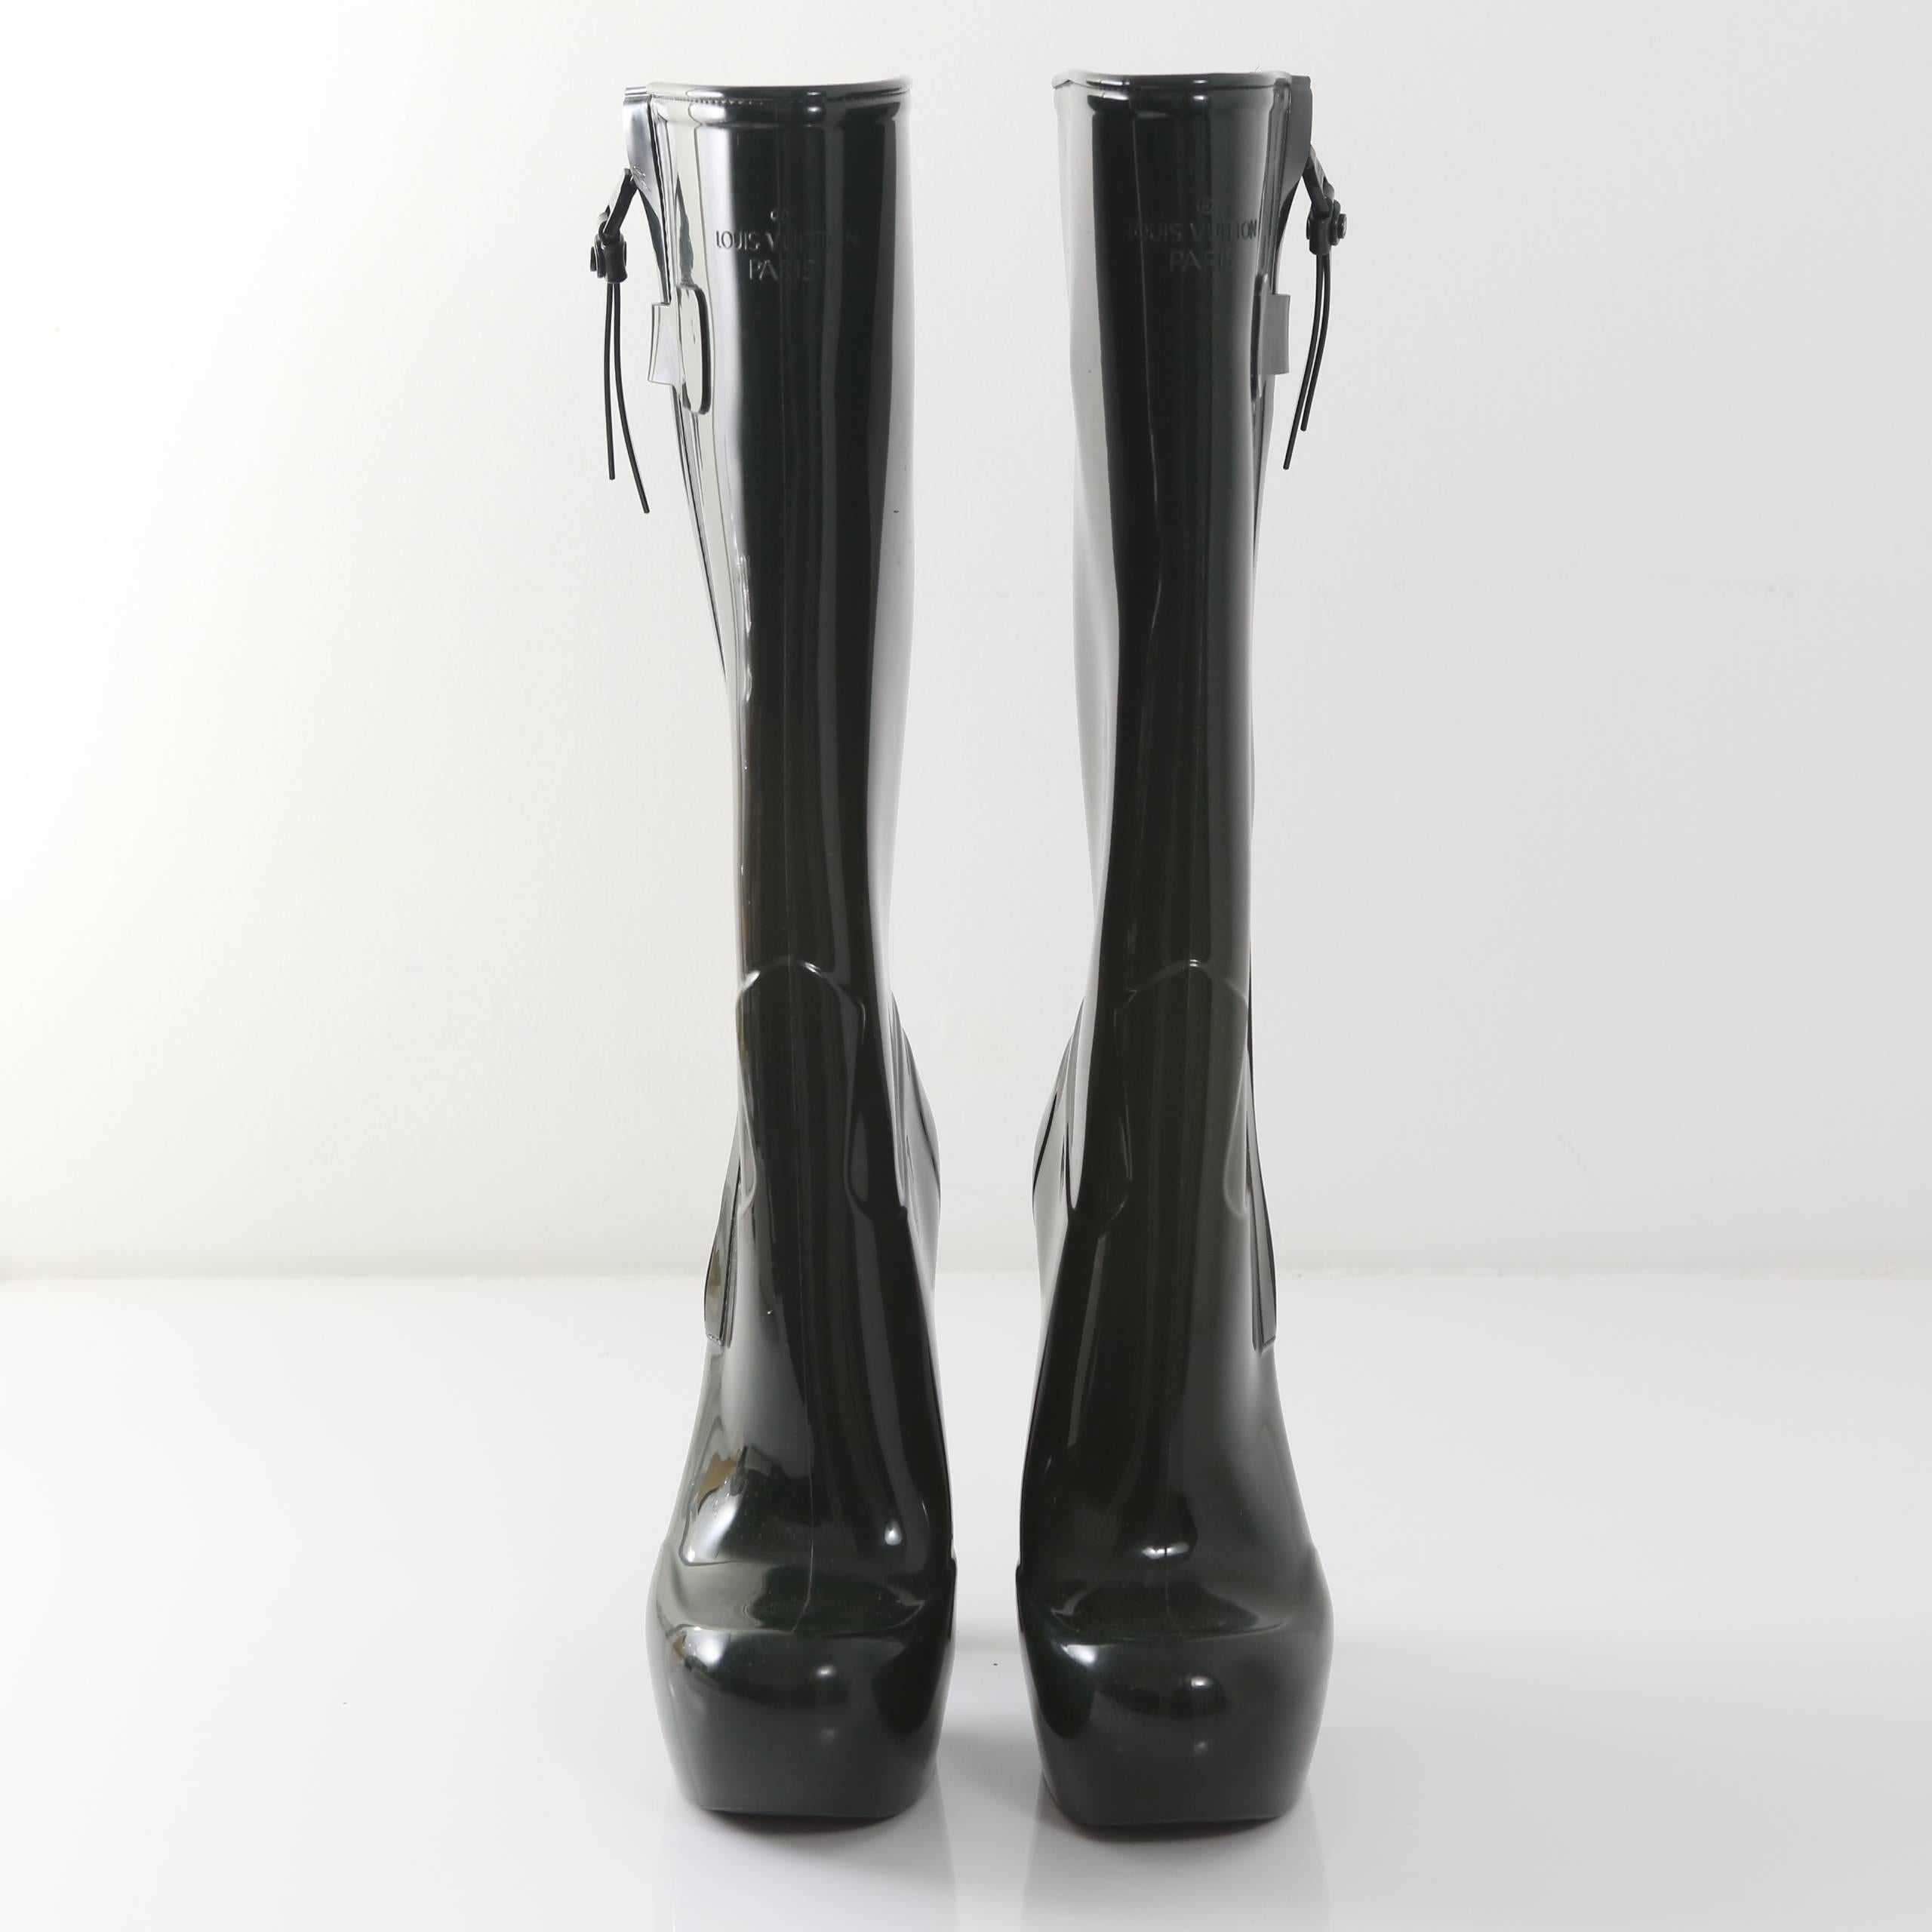 Louis Vuitton hunter green runway fetish rubber rainboots from Fall 2011.  Side zip closure. Designed by Marc Jacobs for LV. 